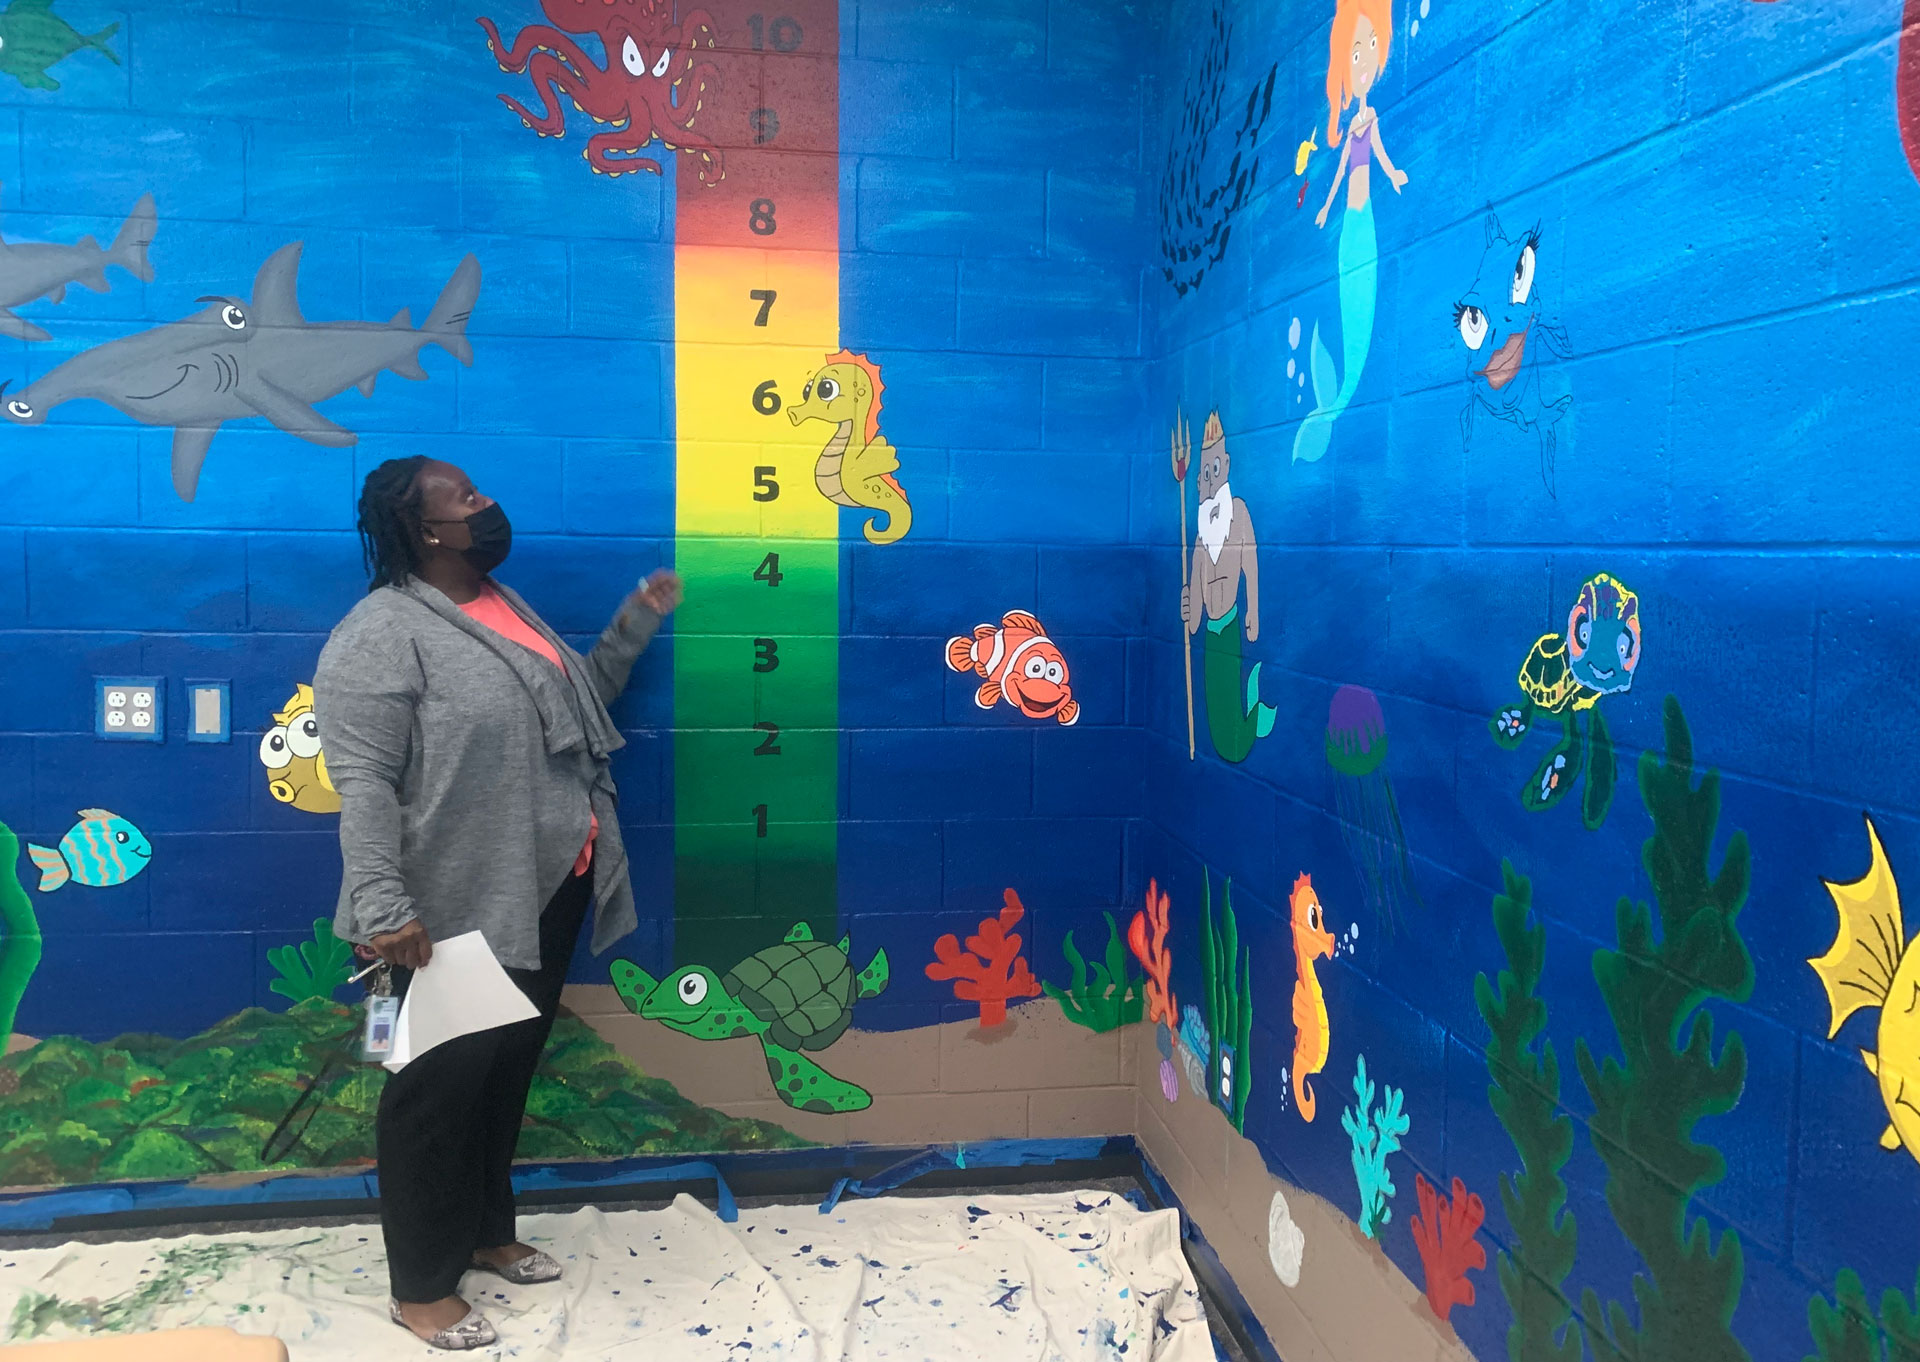 woman stands inside room painted to look like the inside of an aquarium